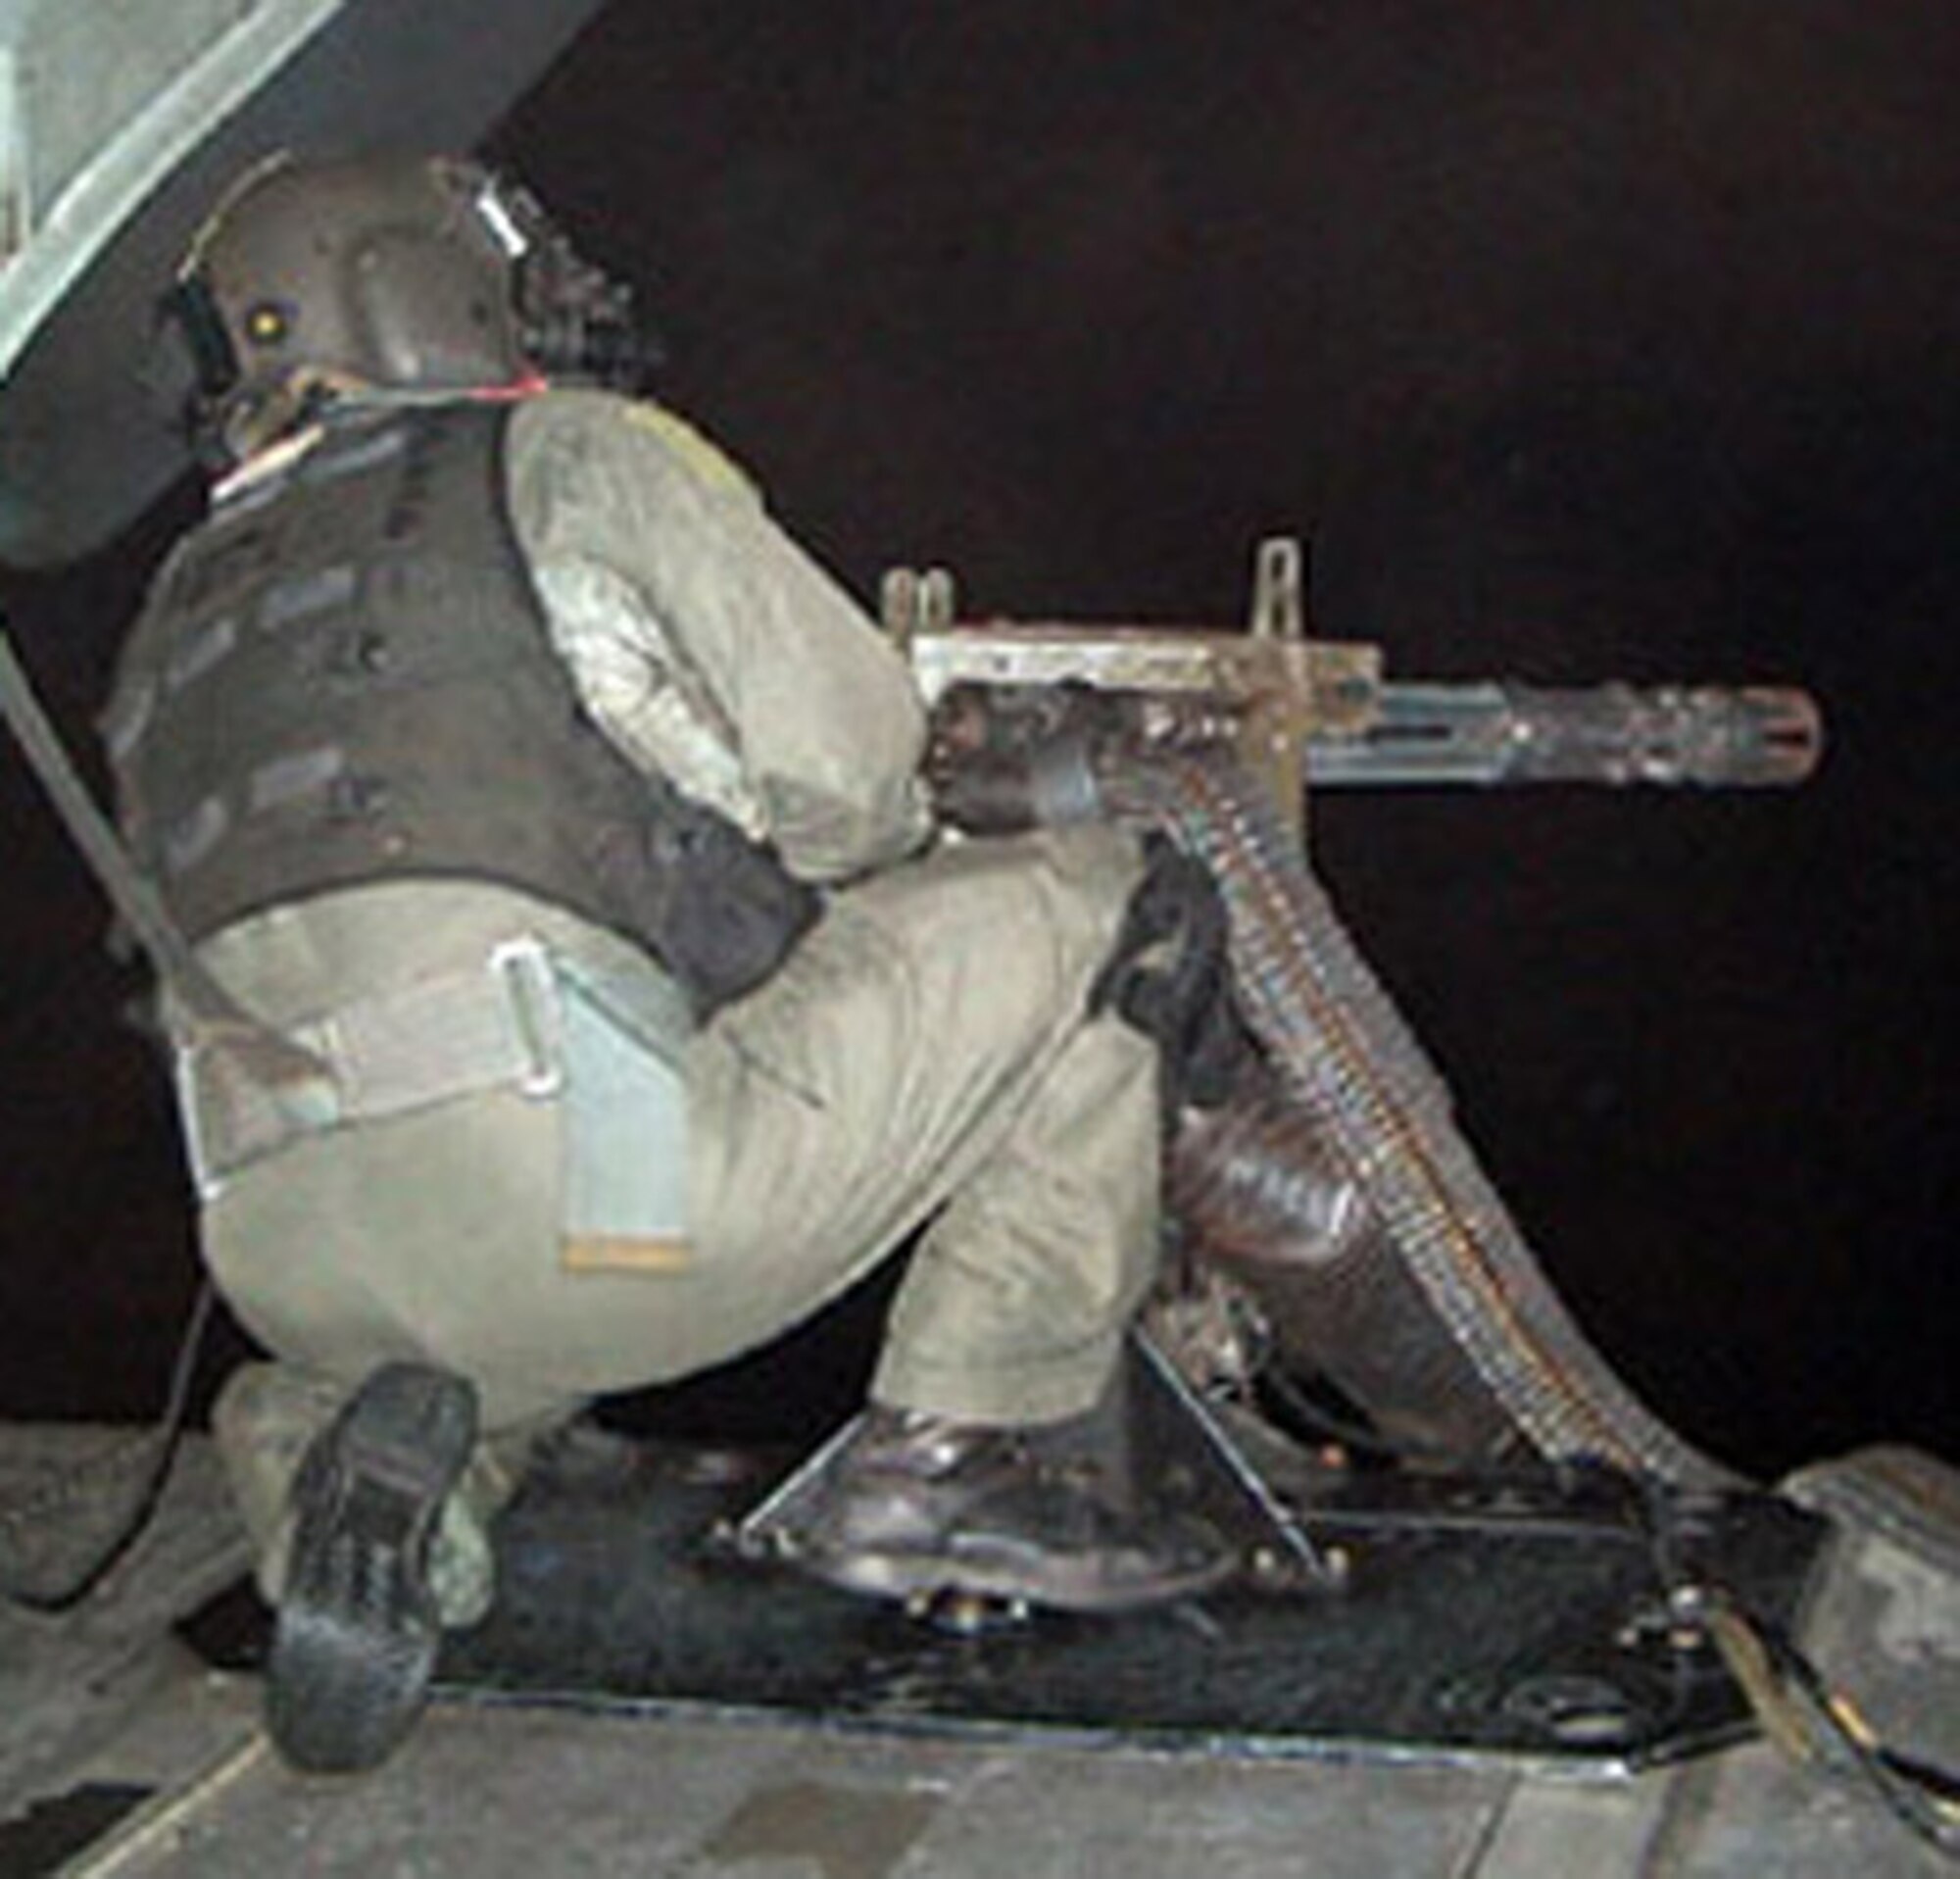 Master Sgt. Byron Allen, 1st Special Operations Group, works his 7.62 mini-gun from the back of an MH-53 PAVE LOW helicopter. Also one of the first six Airmen to receive the Air Force Combat Action Medal, Sergeant Allen was selected for the prestigious honor because of his heroics on a mission in Iraq in 2004. (Courtesy photo)